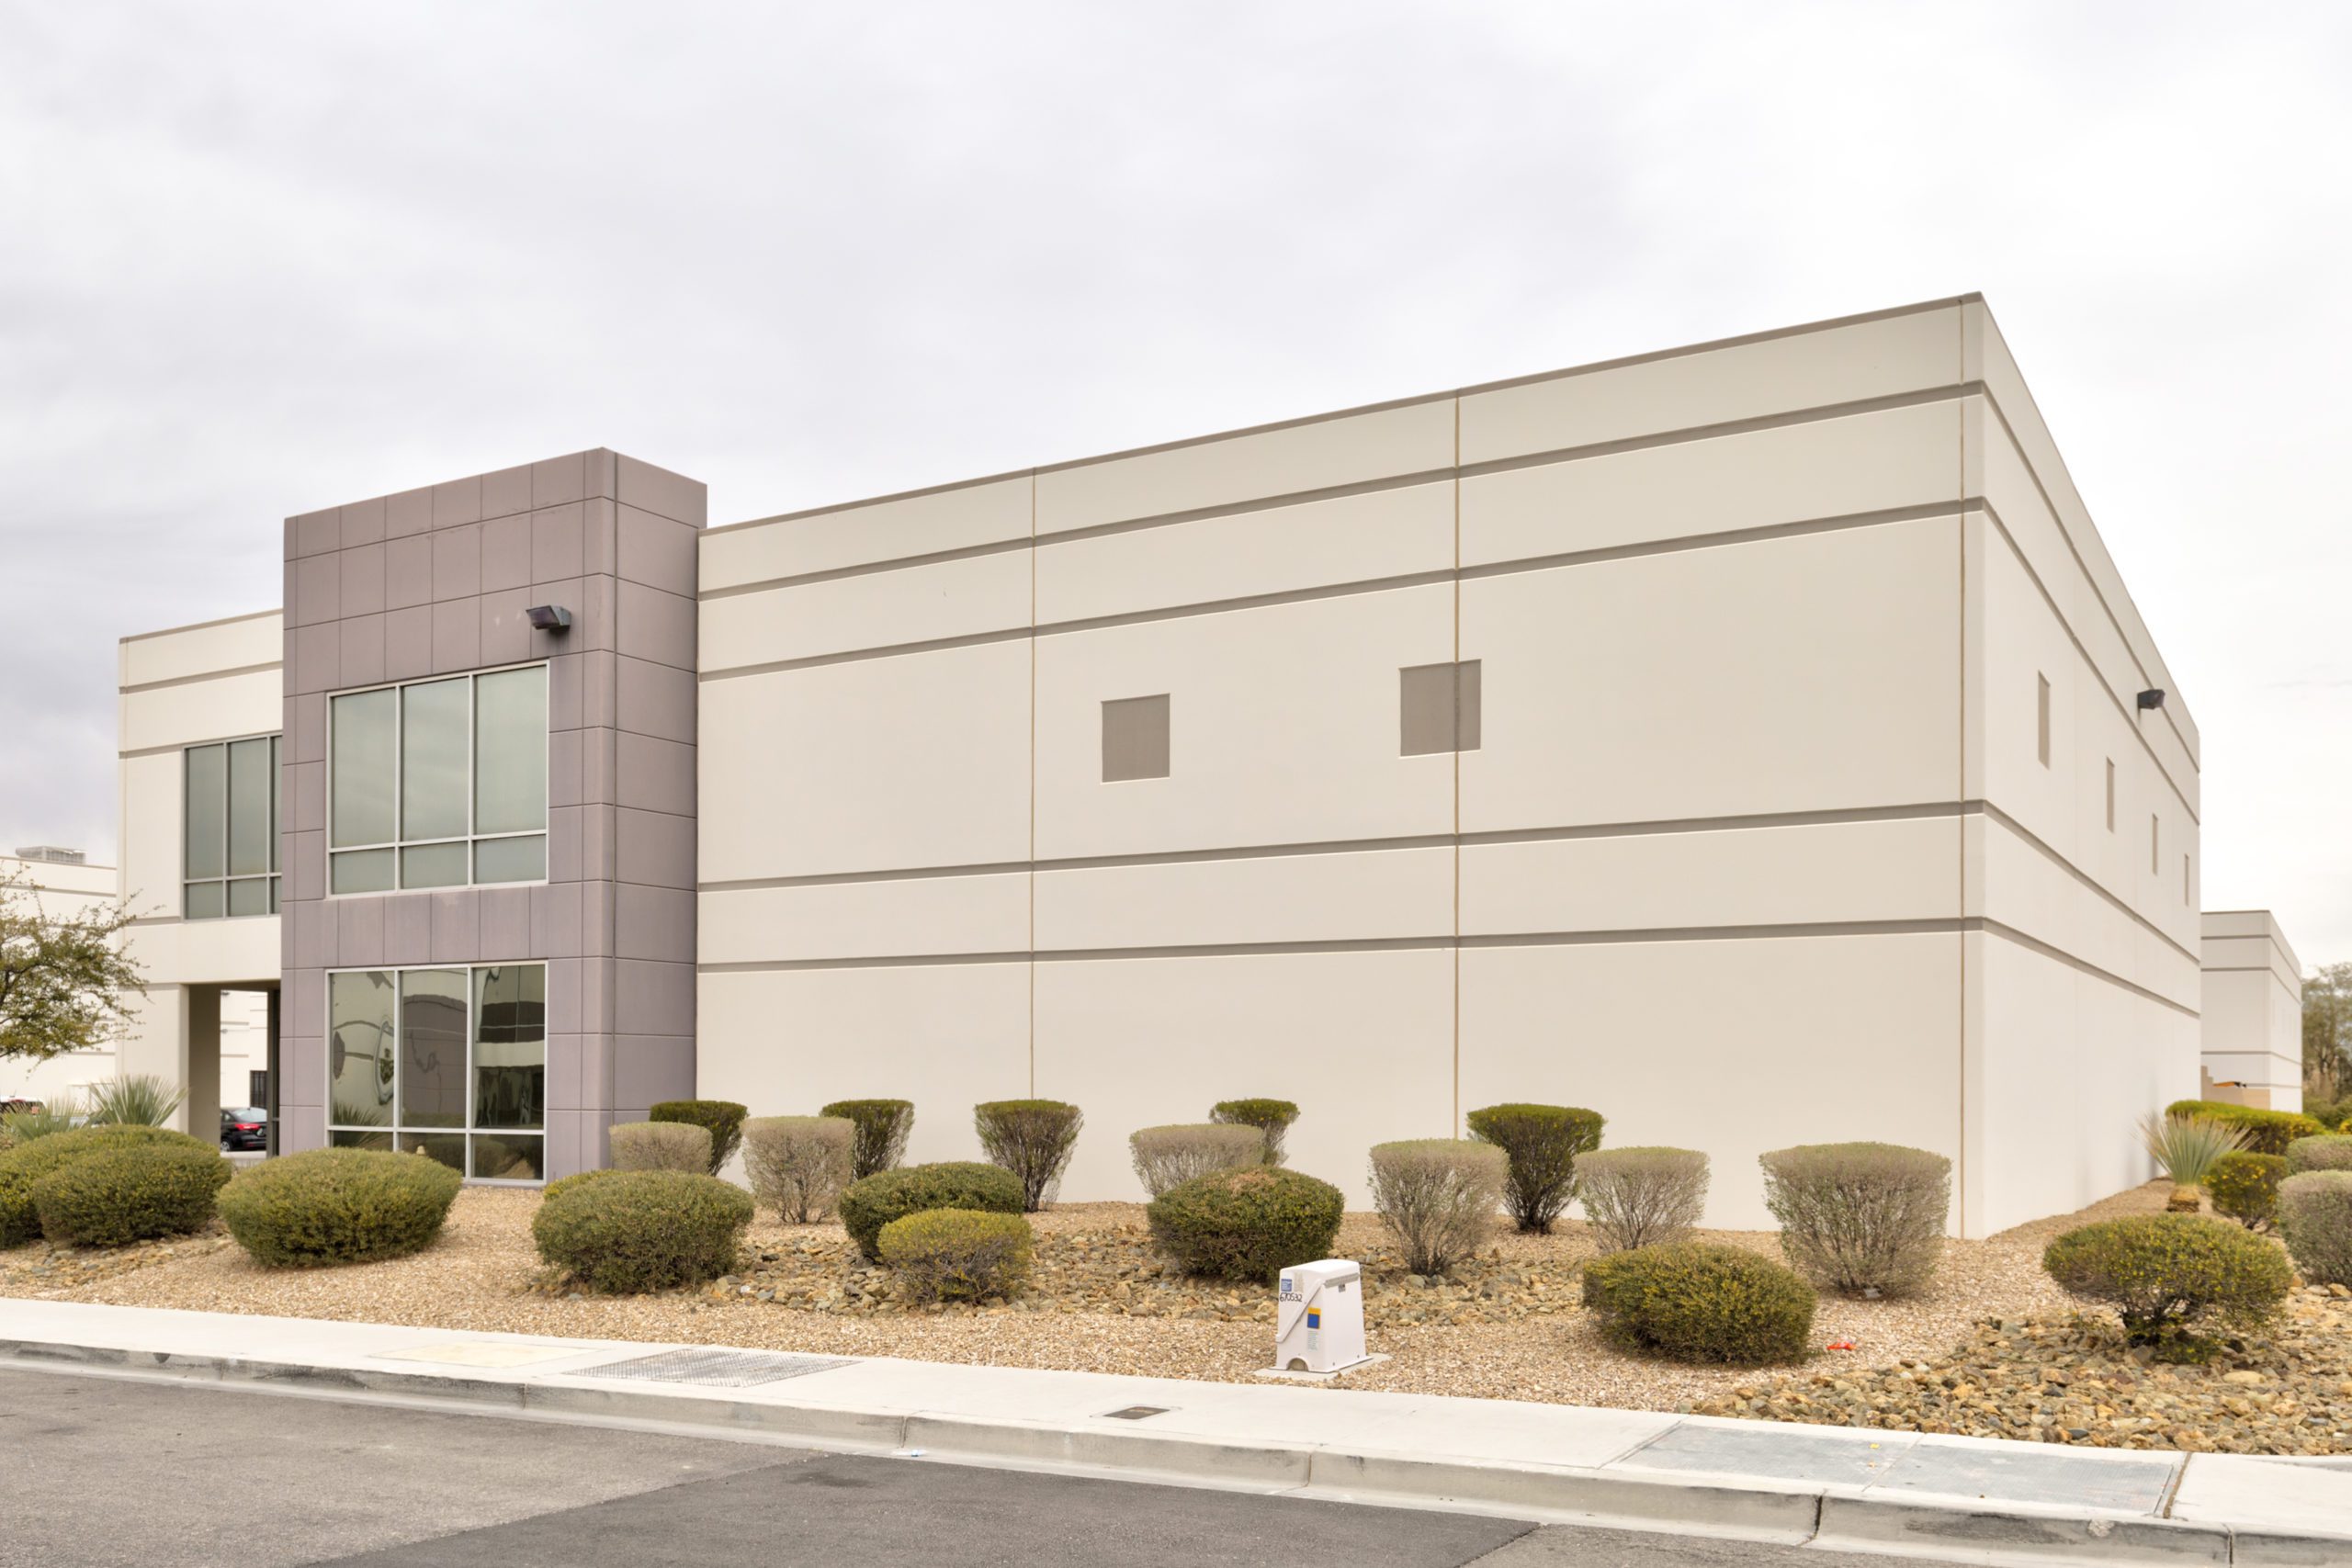 8,347 SF single-user industrial property sold to all cash offer